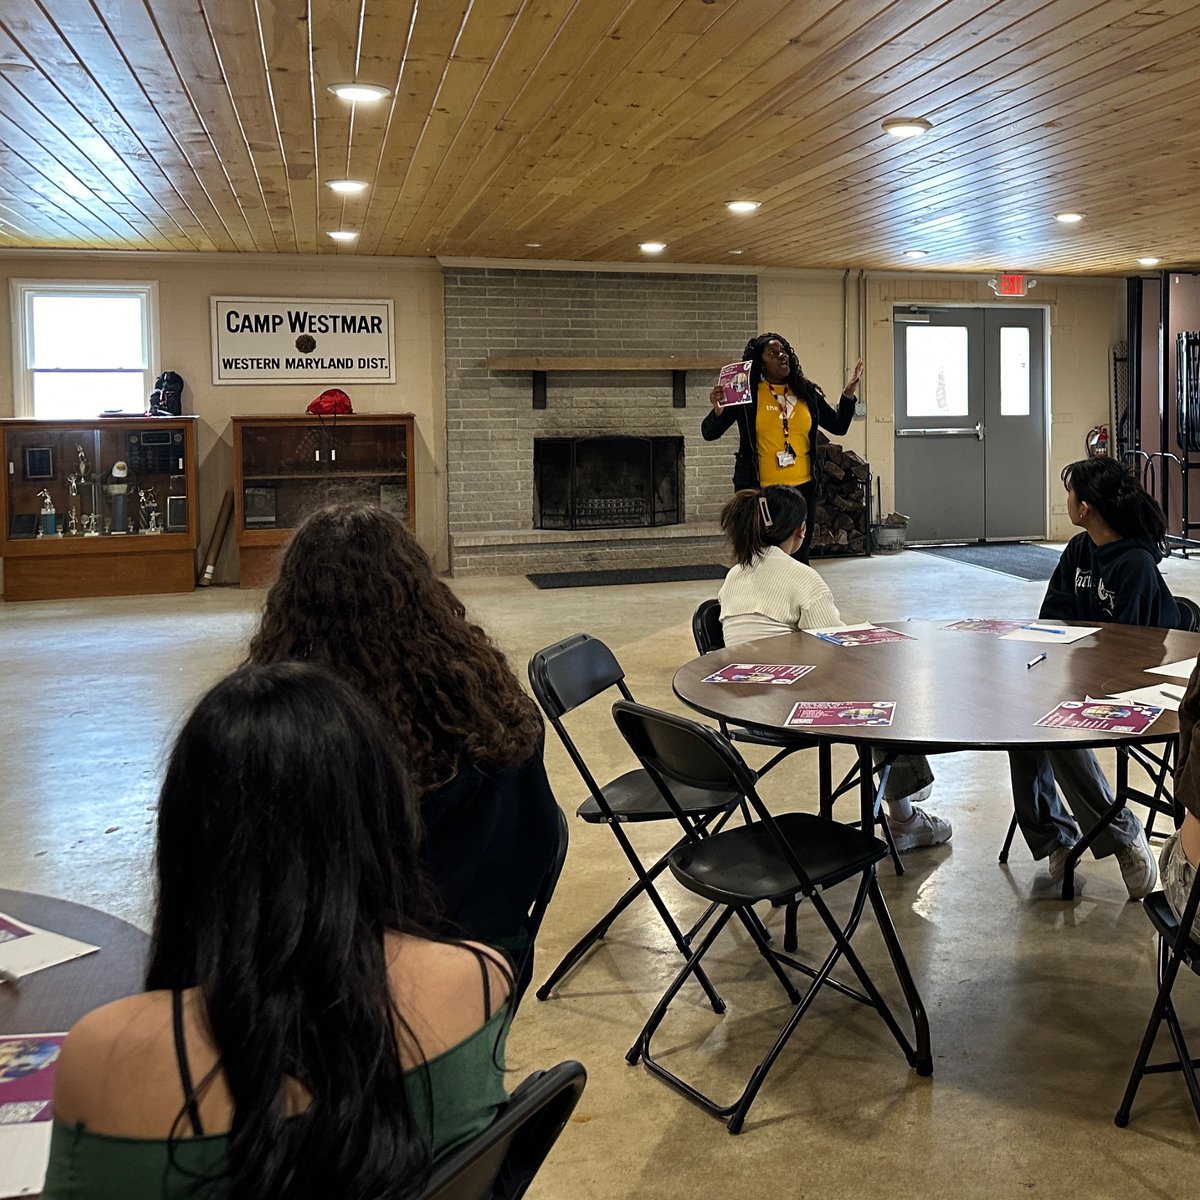 LYNX scholars visited YMCA Camp West Mar to explore the opportunities available through the YMCA of Frederick County. They engaged in team building activities, explored core values, and analyzed the characteristic of a good leader! @FCPSMaryland @YMCAofFREDERICK